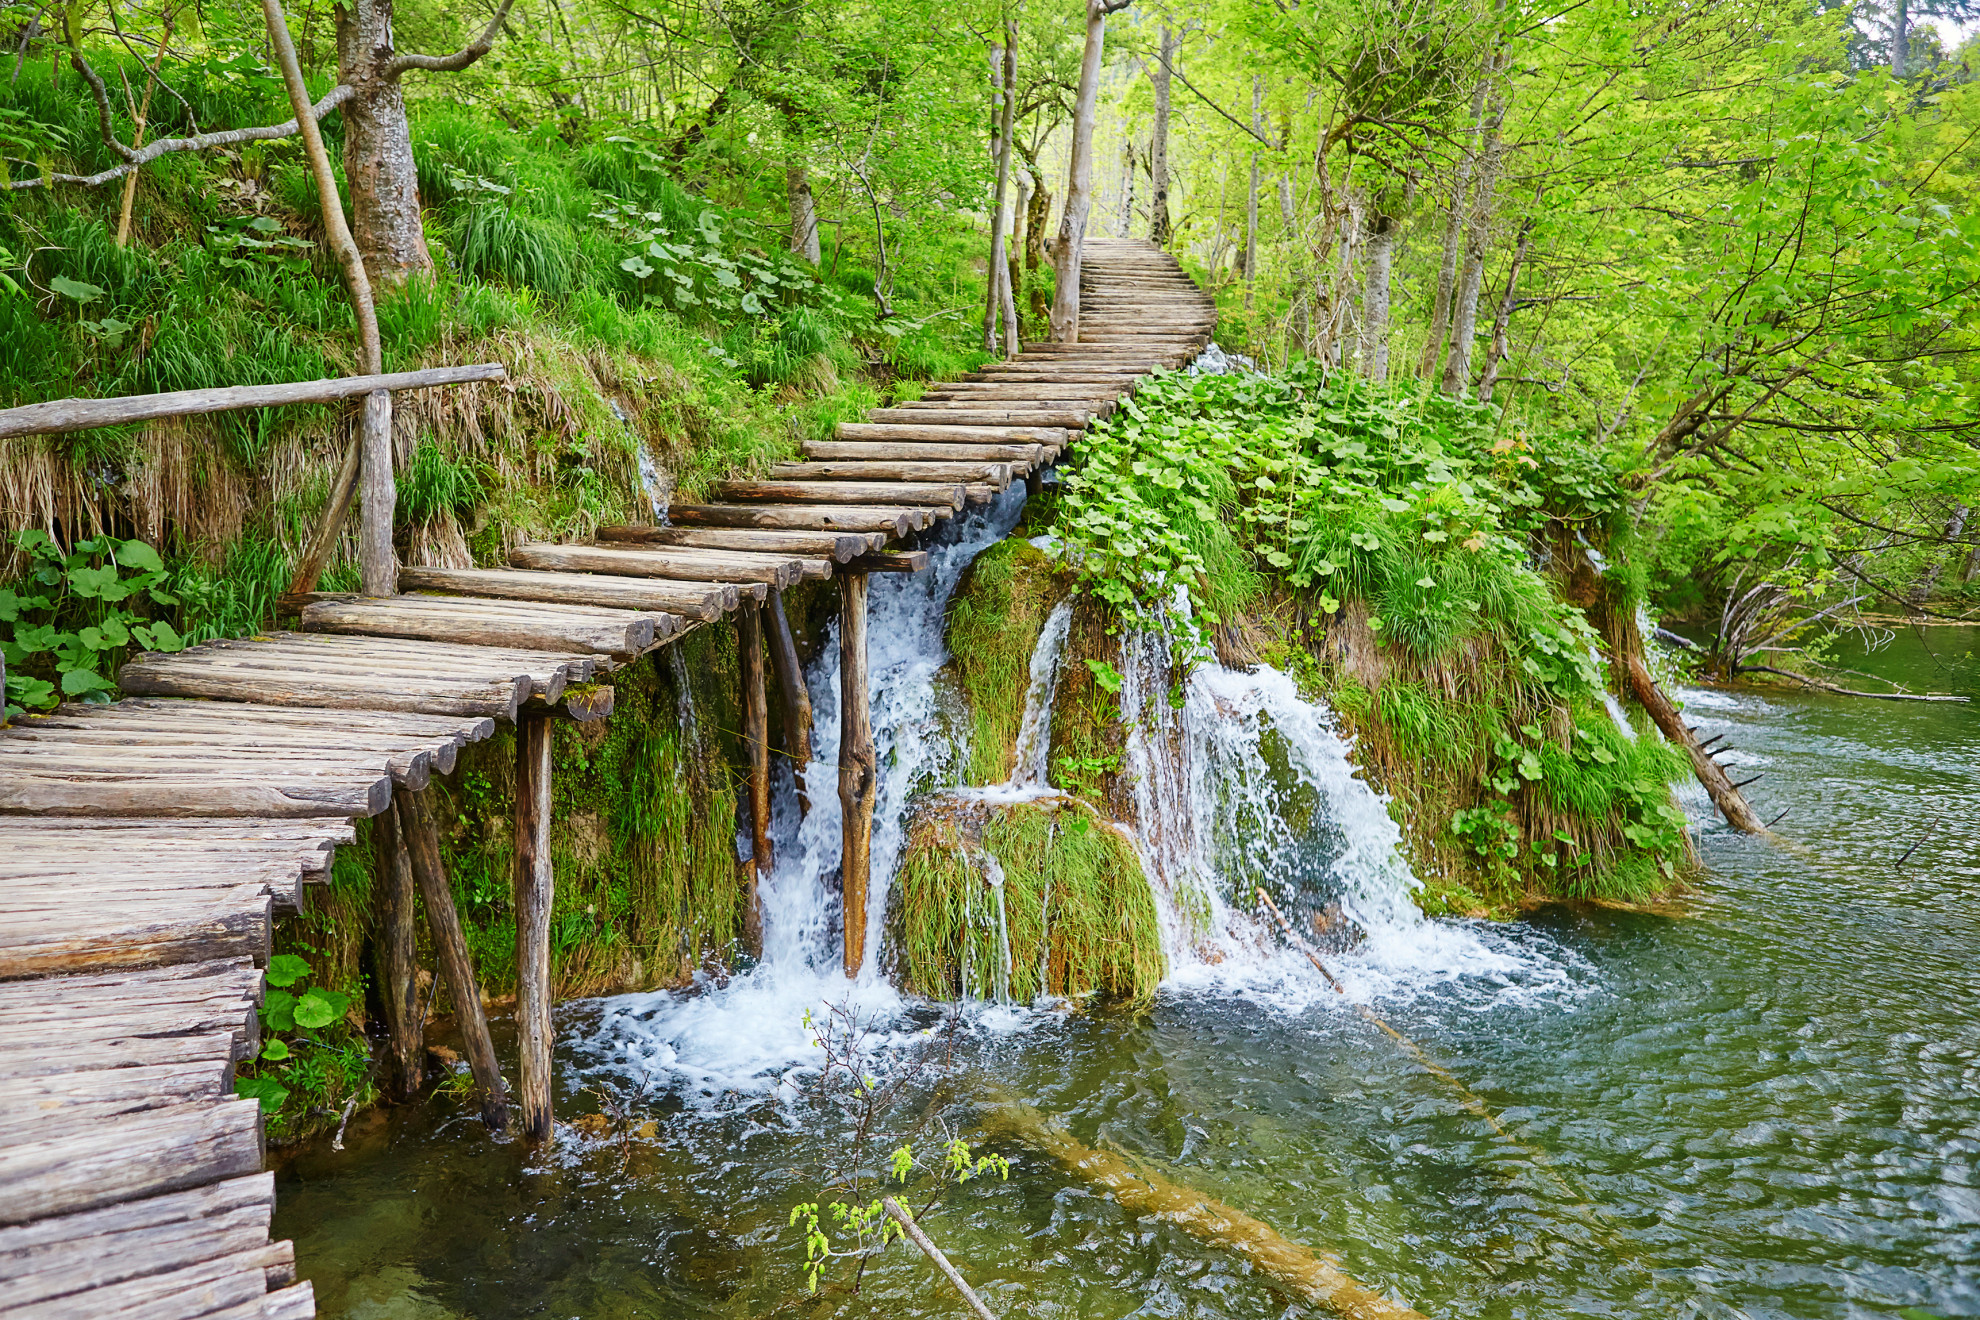 Cascades in Plitvice lakes national park